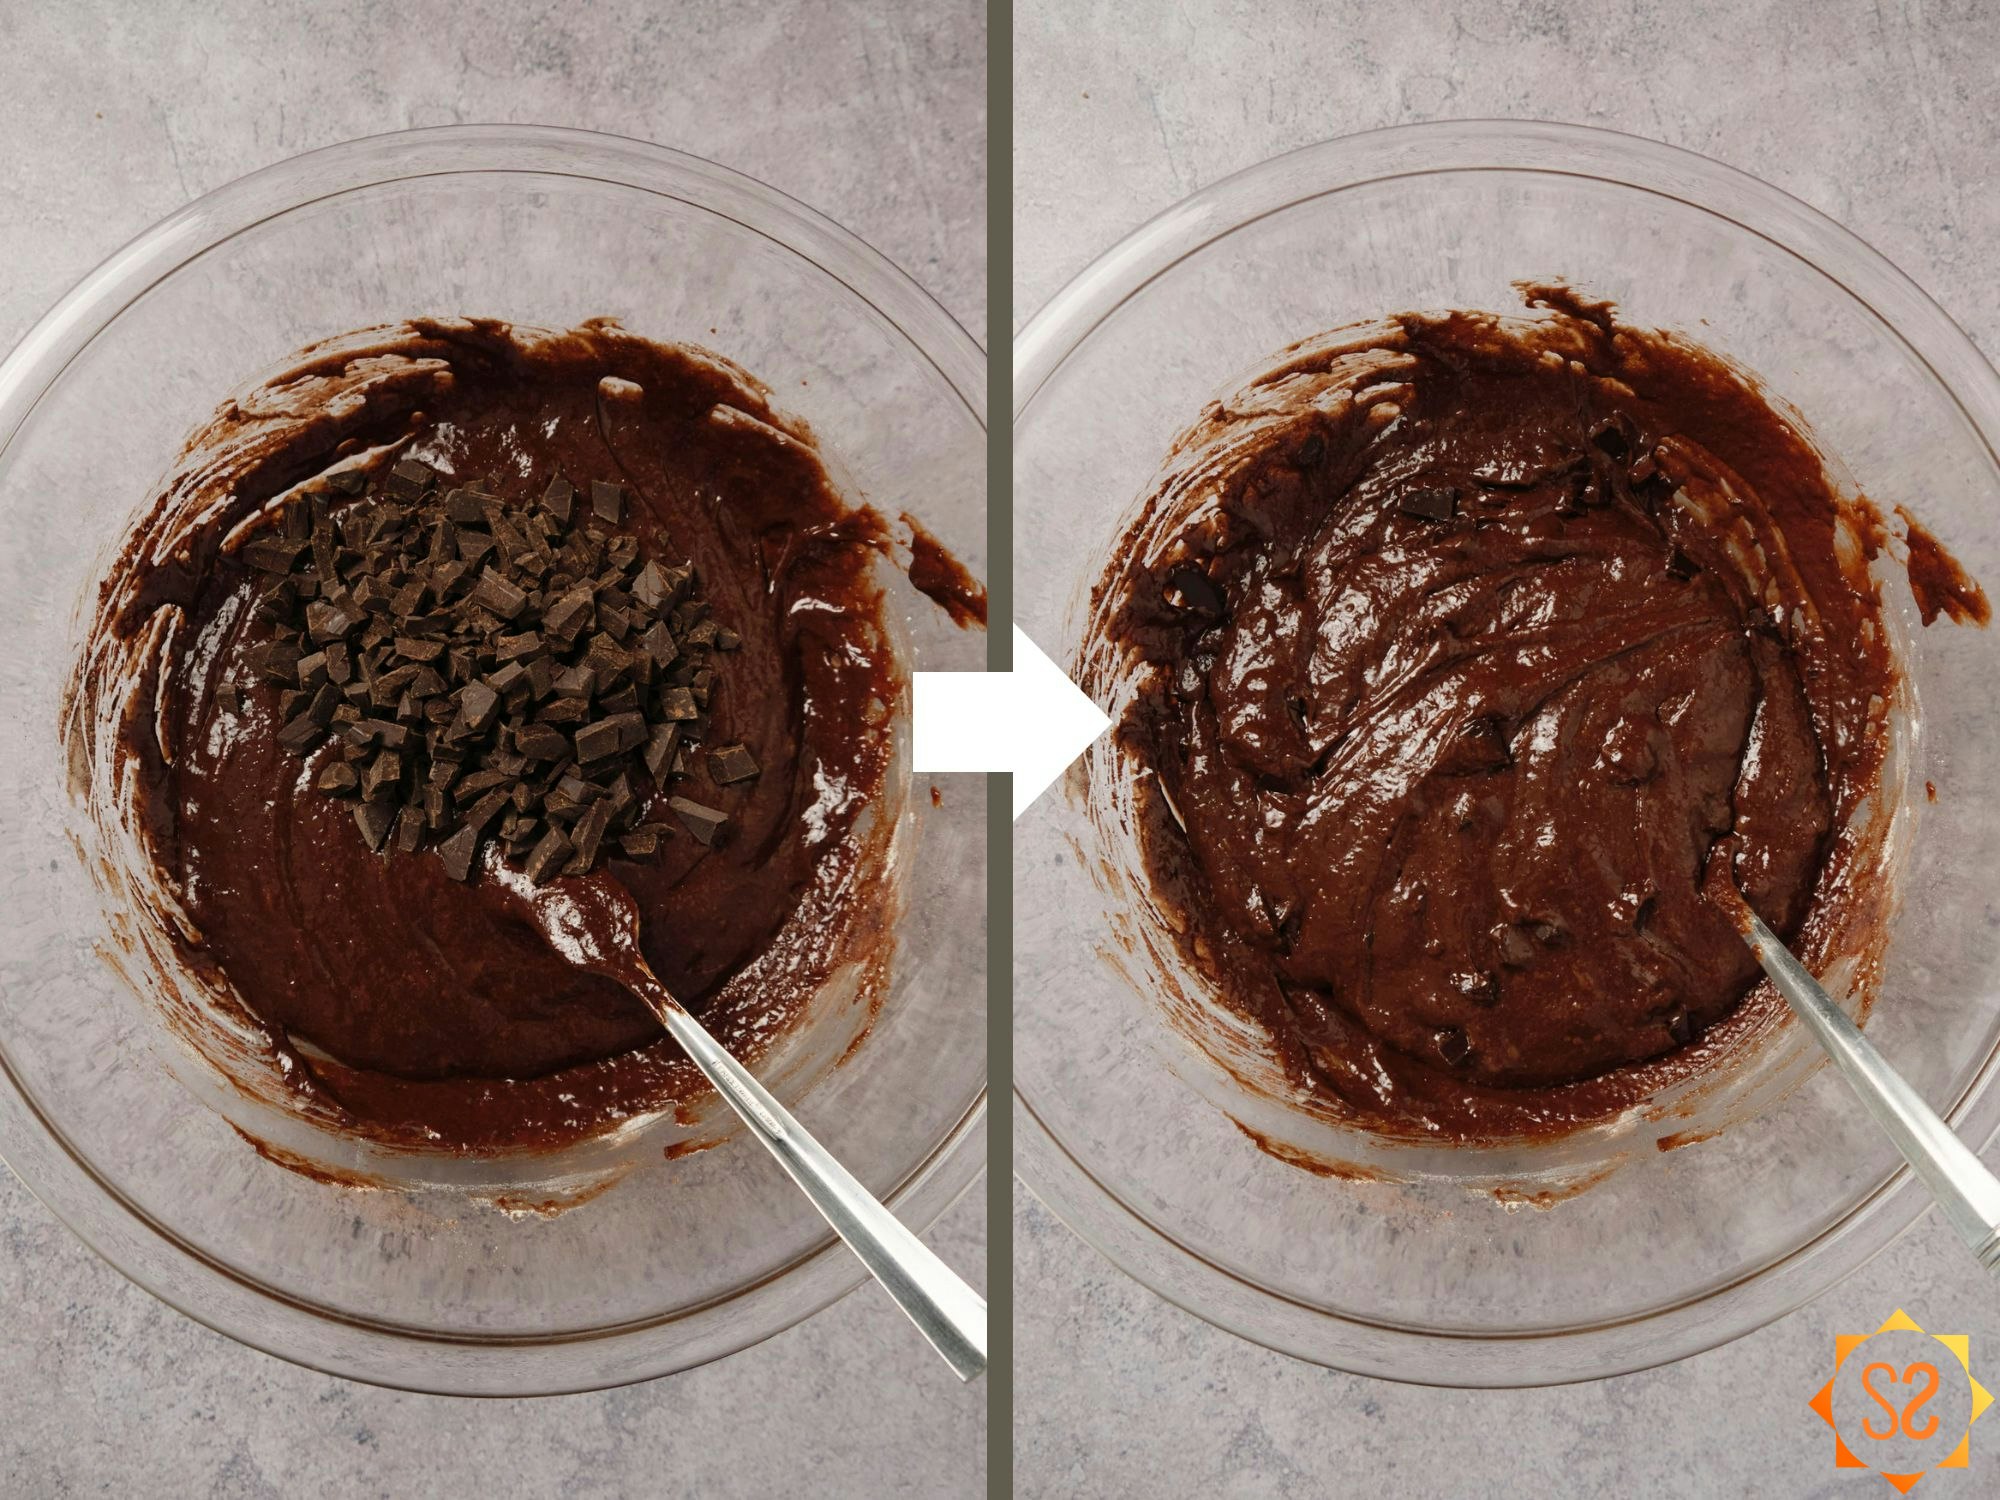 Chocolate chunks being added to brownie batter (left: before mixing; right: after mixing).